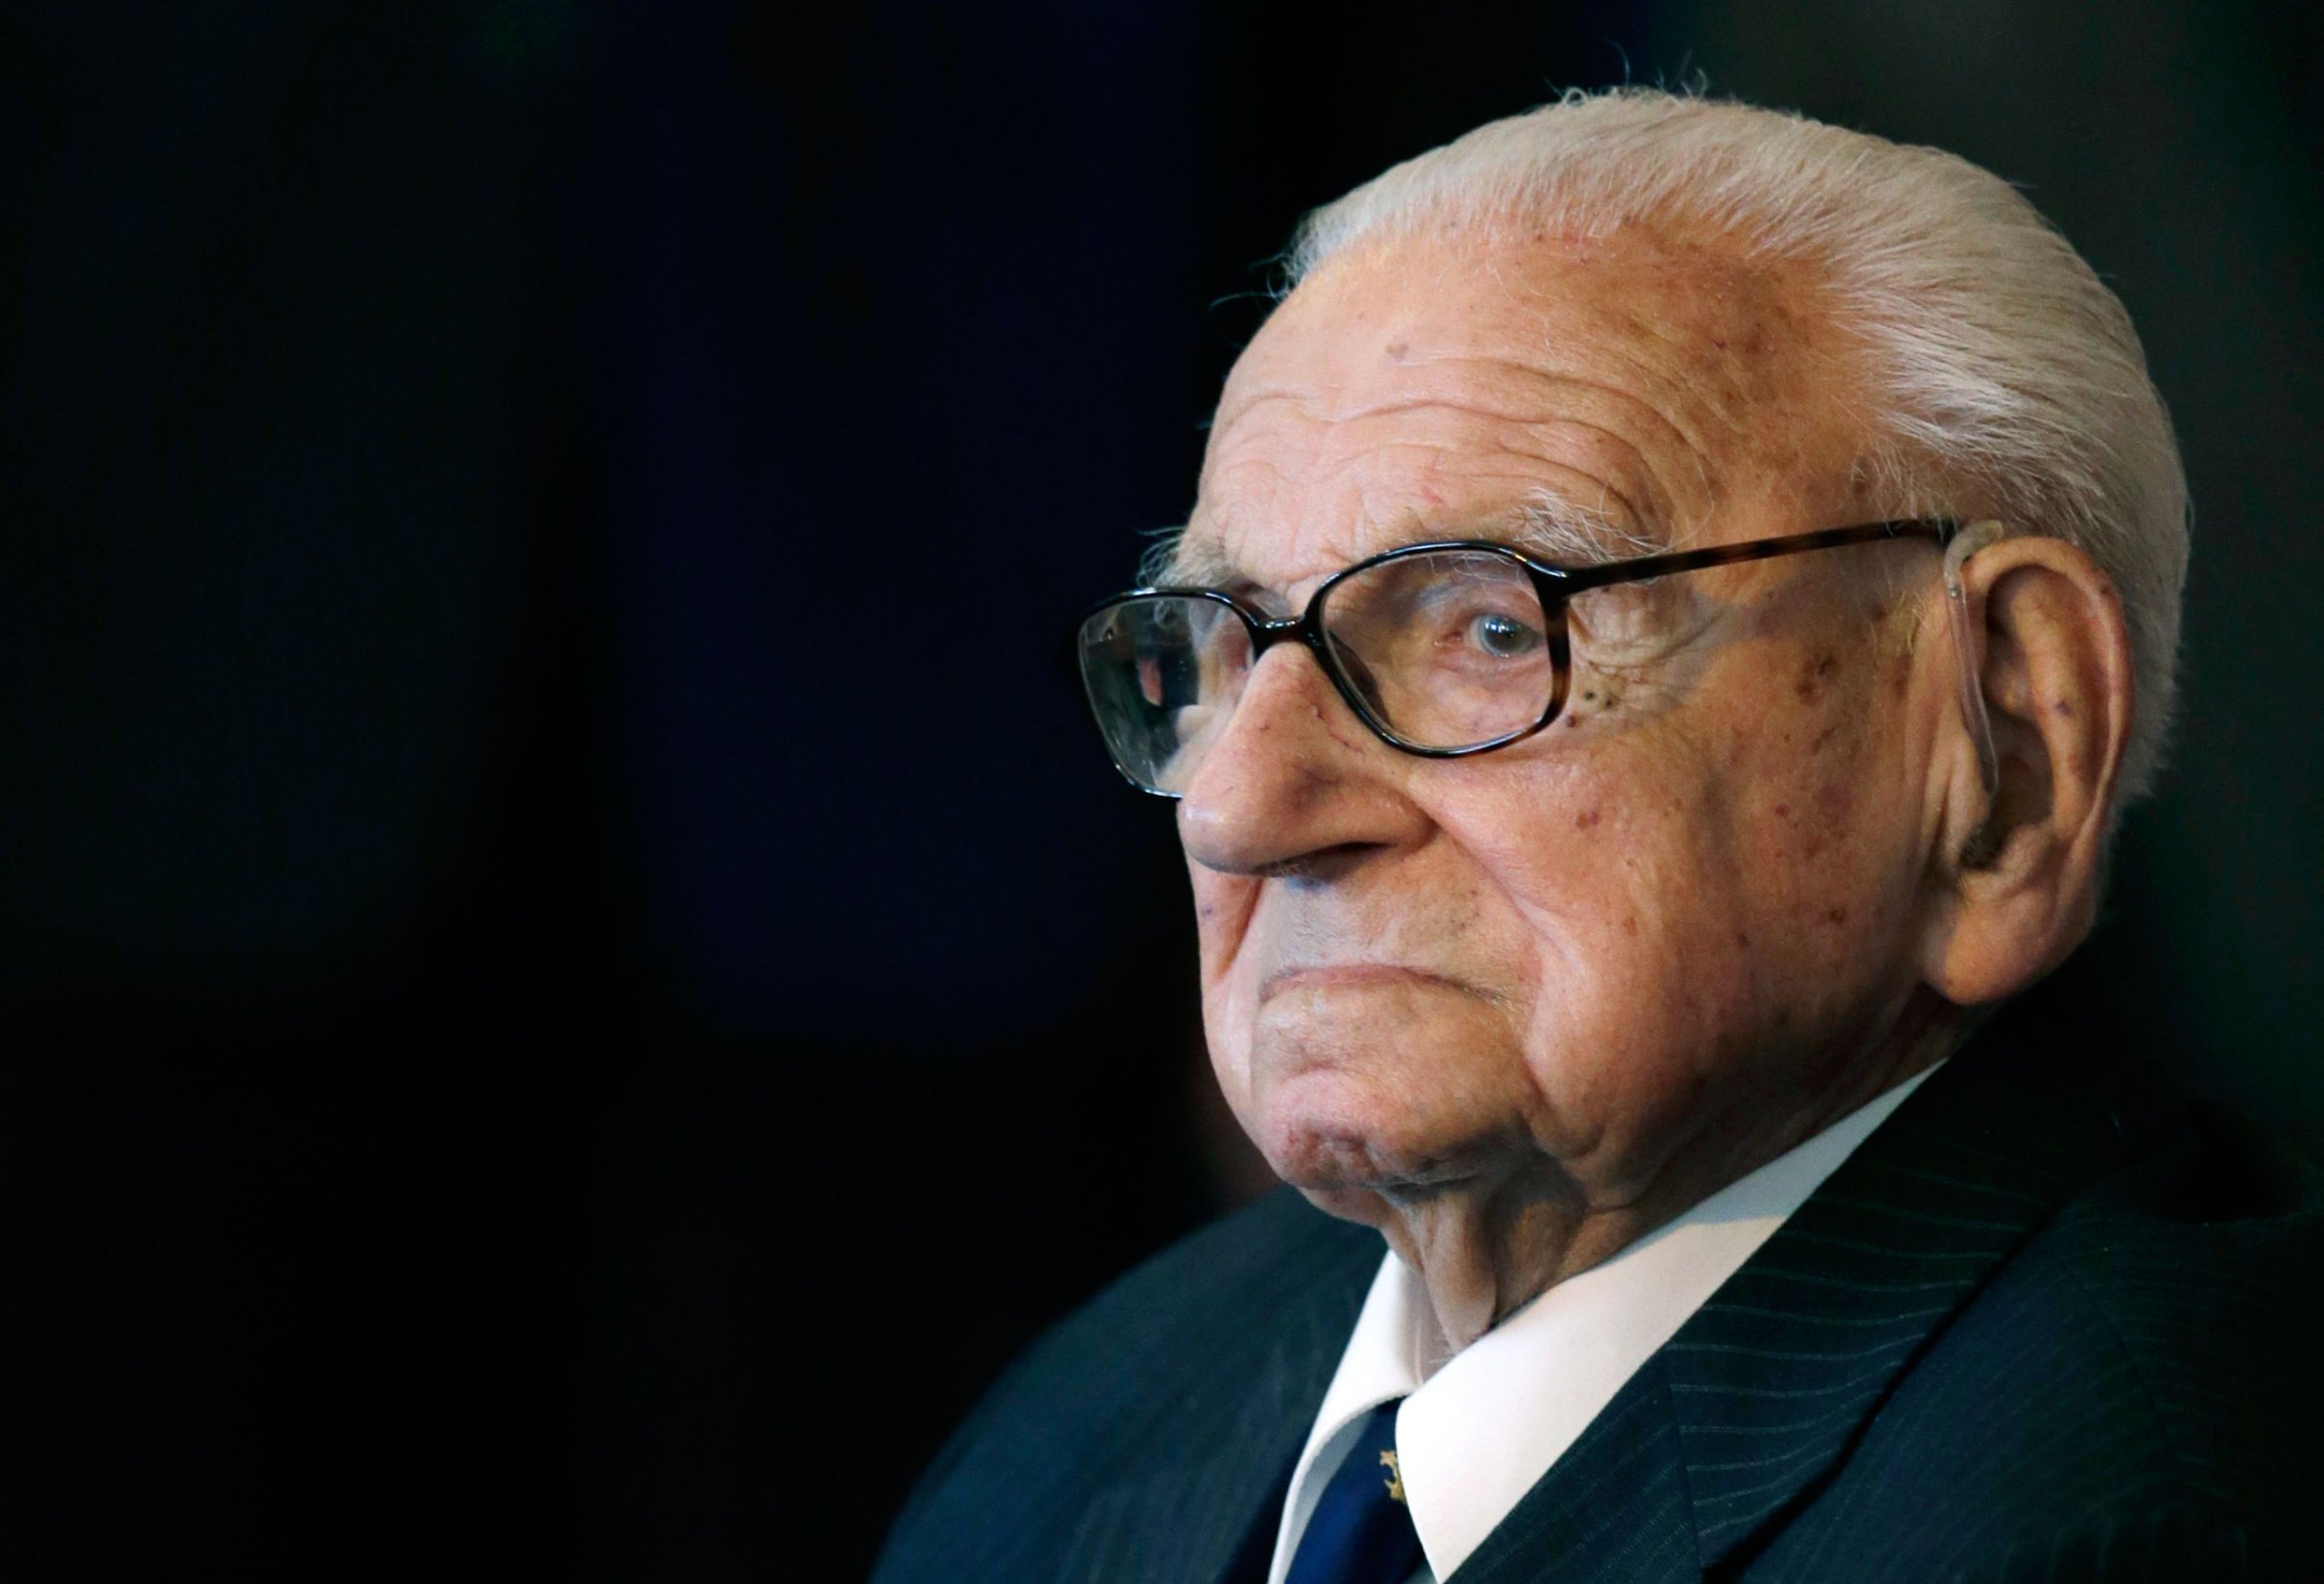 An Oct. 28, 2014 file photo of the then 105 year-old Sir Nicholas Winton waiting to be decorated with the highest Czech Republic's decoration, The Order of the White Lion at the Prague Castle in Prague, Czech Republic. Winton, a humanitarian who almost single-handedly saved more than 650 Jewish children from the Holocaust, earning himself the label “Britain's Schindler,” has died. He was 106. The Rotary Club of Maidenhead, of which he was former president, said Winton died Wednesday, July 1, 2015, with his daughter Barbara and two grandchildren at his side. (AP Photo/Petr David Josek, File)